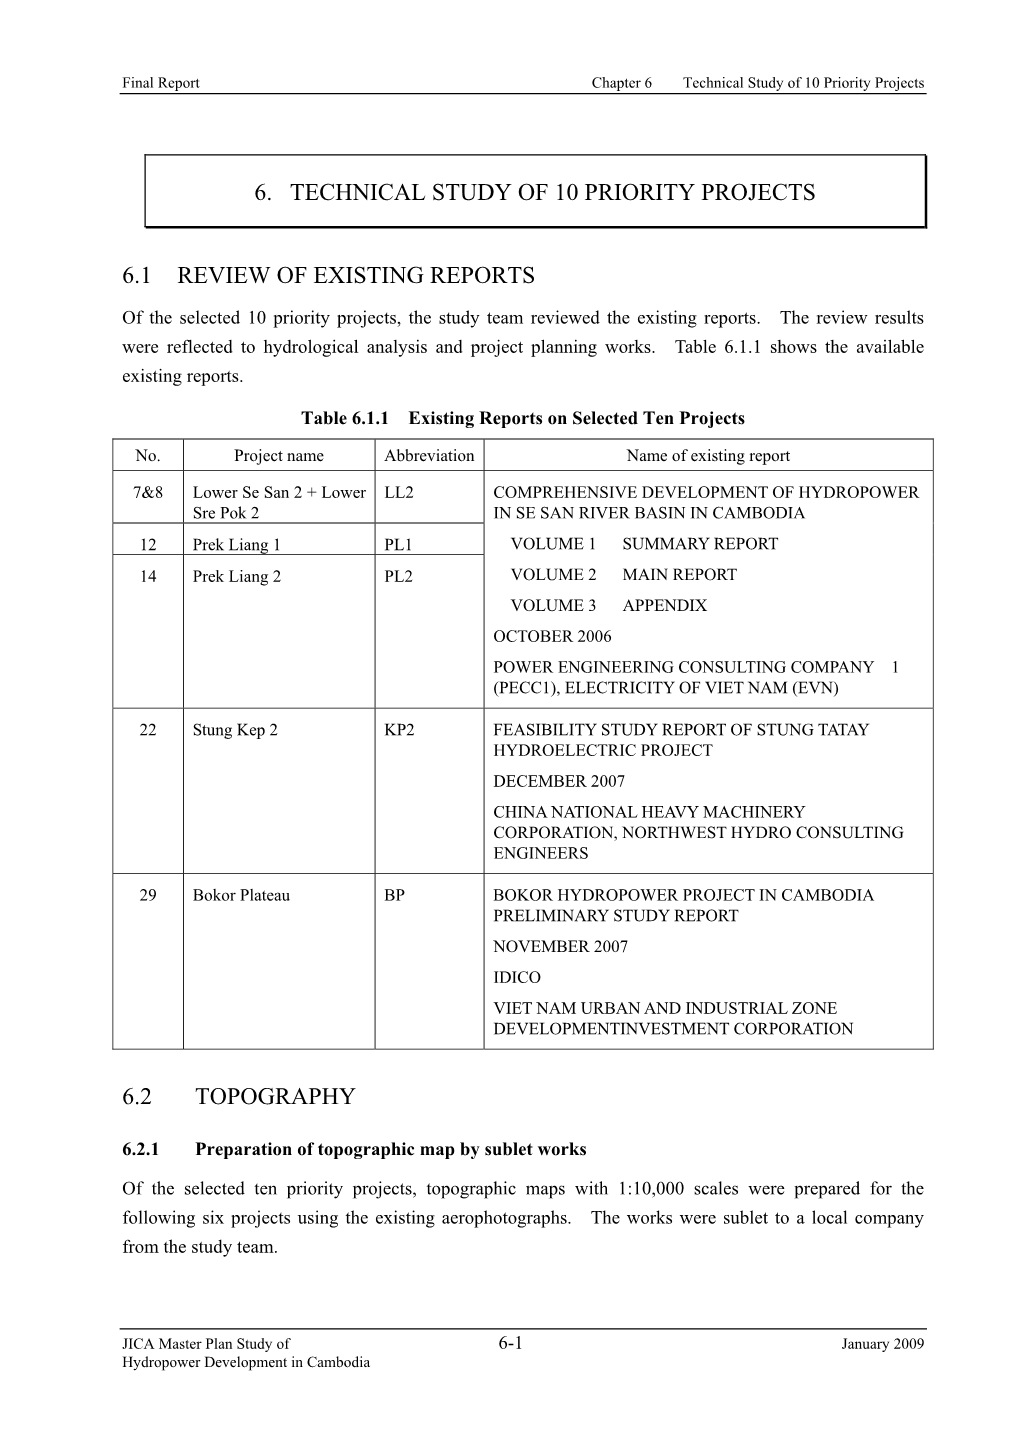 6. Technical Study of 10 Priority Projects 6.1 Review of Existing Reports